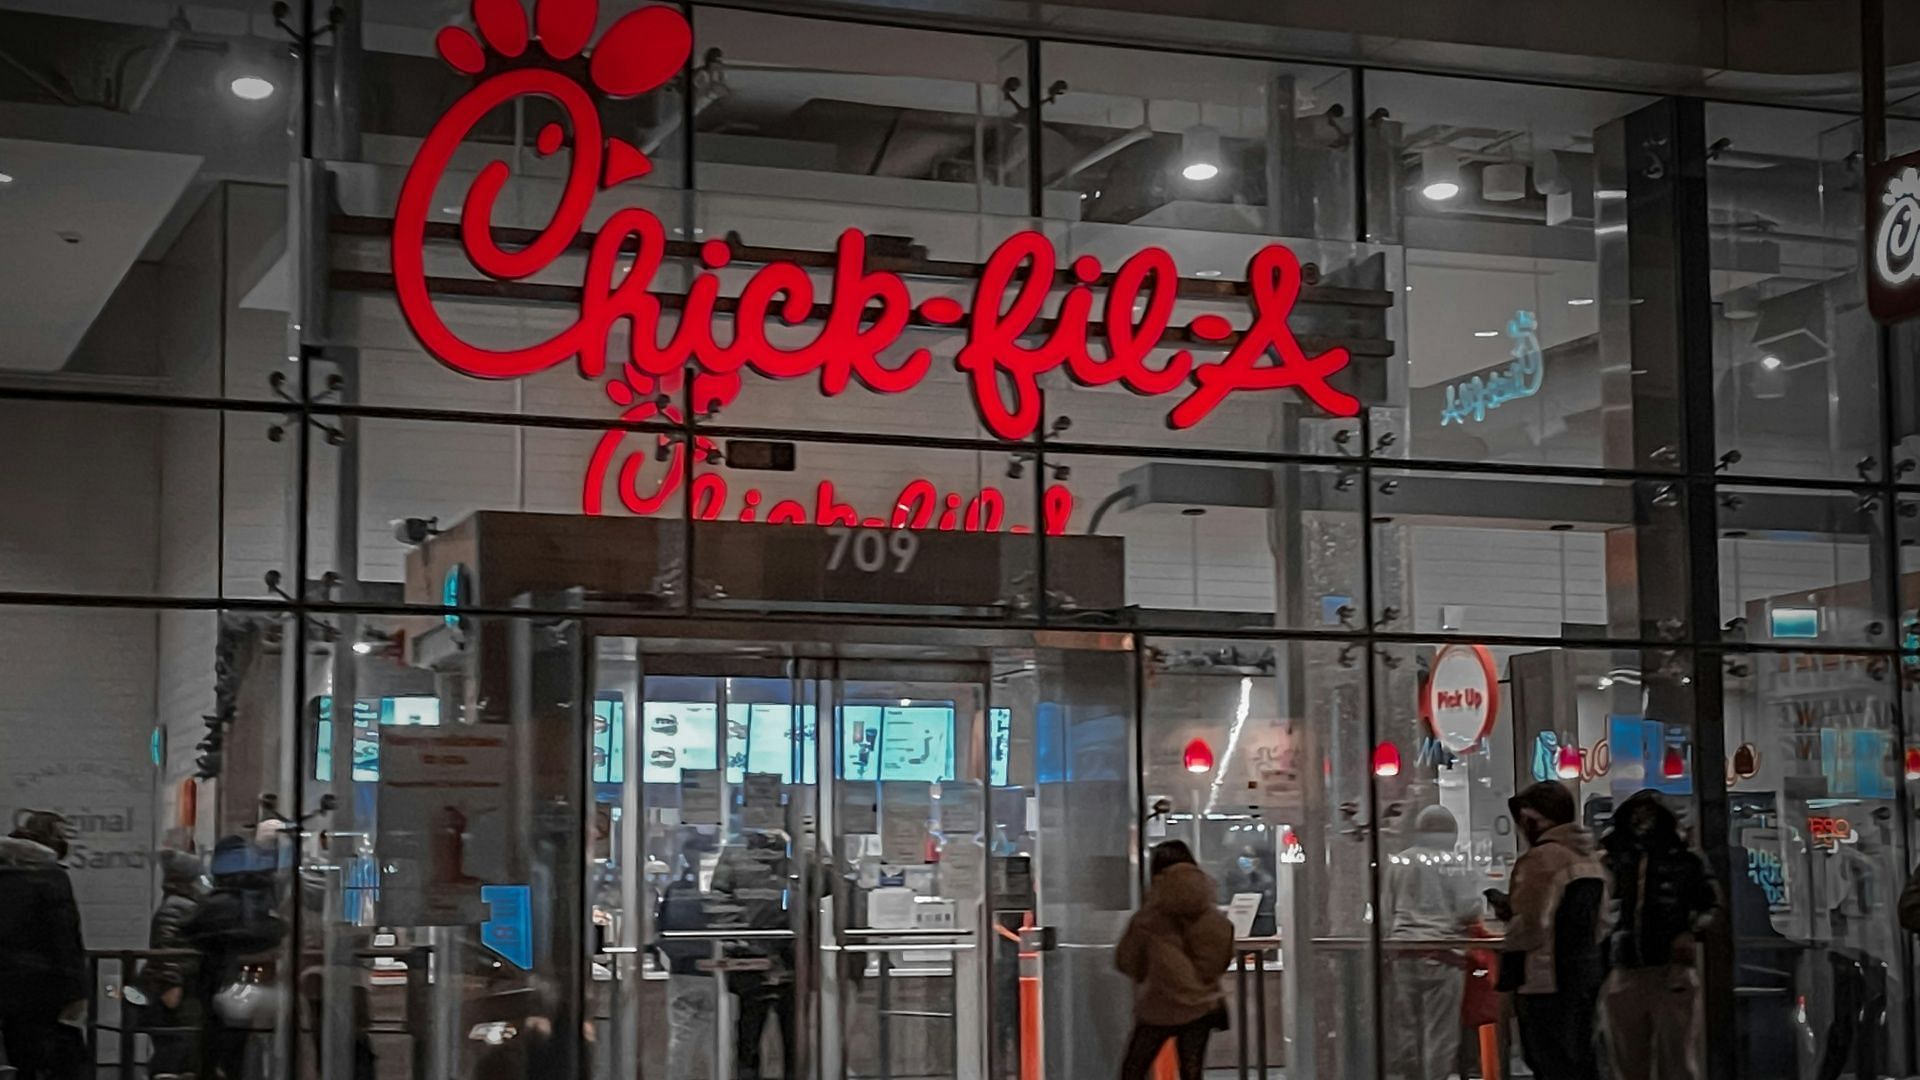 Chic-fil-A is no longer completely antibiotic free (Photo by Malhar Patel on Unsplash)